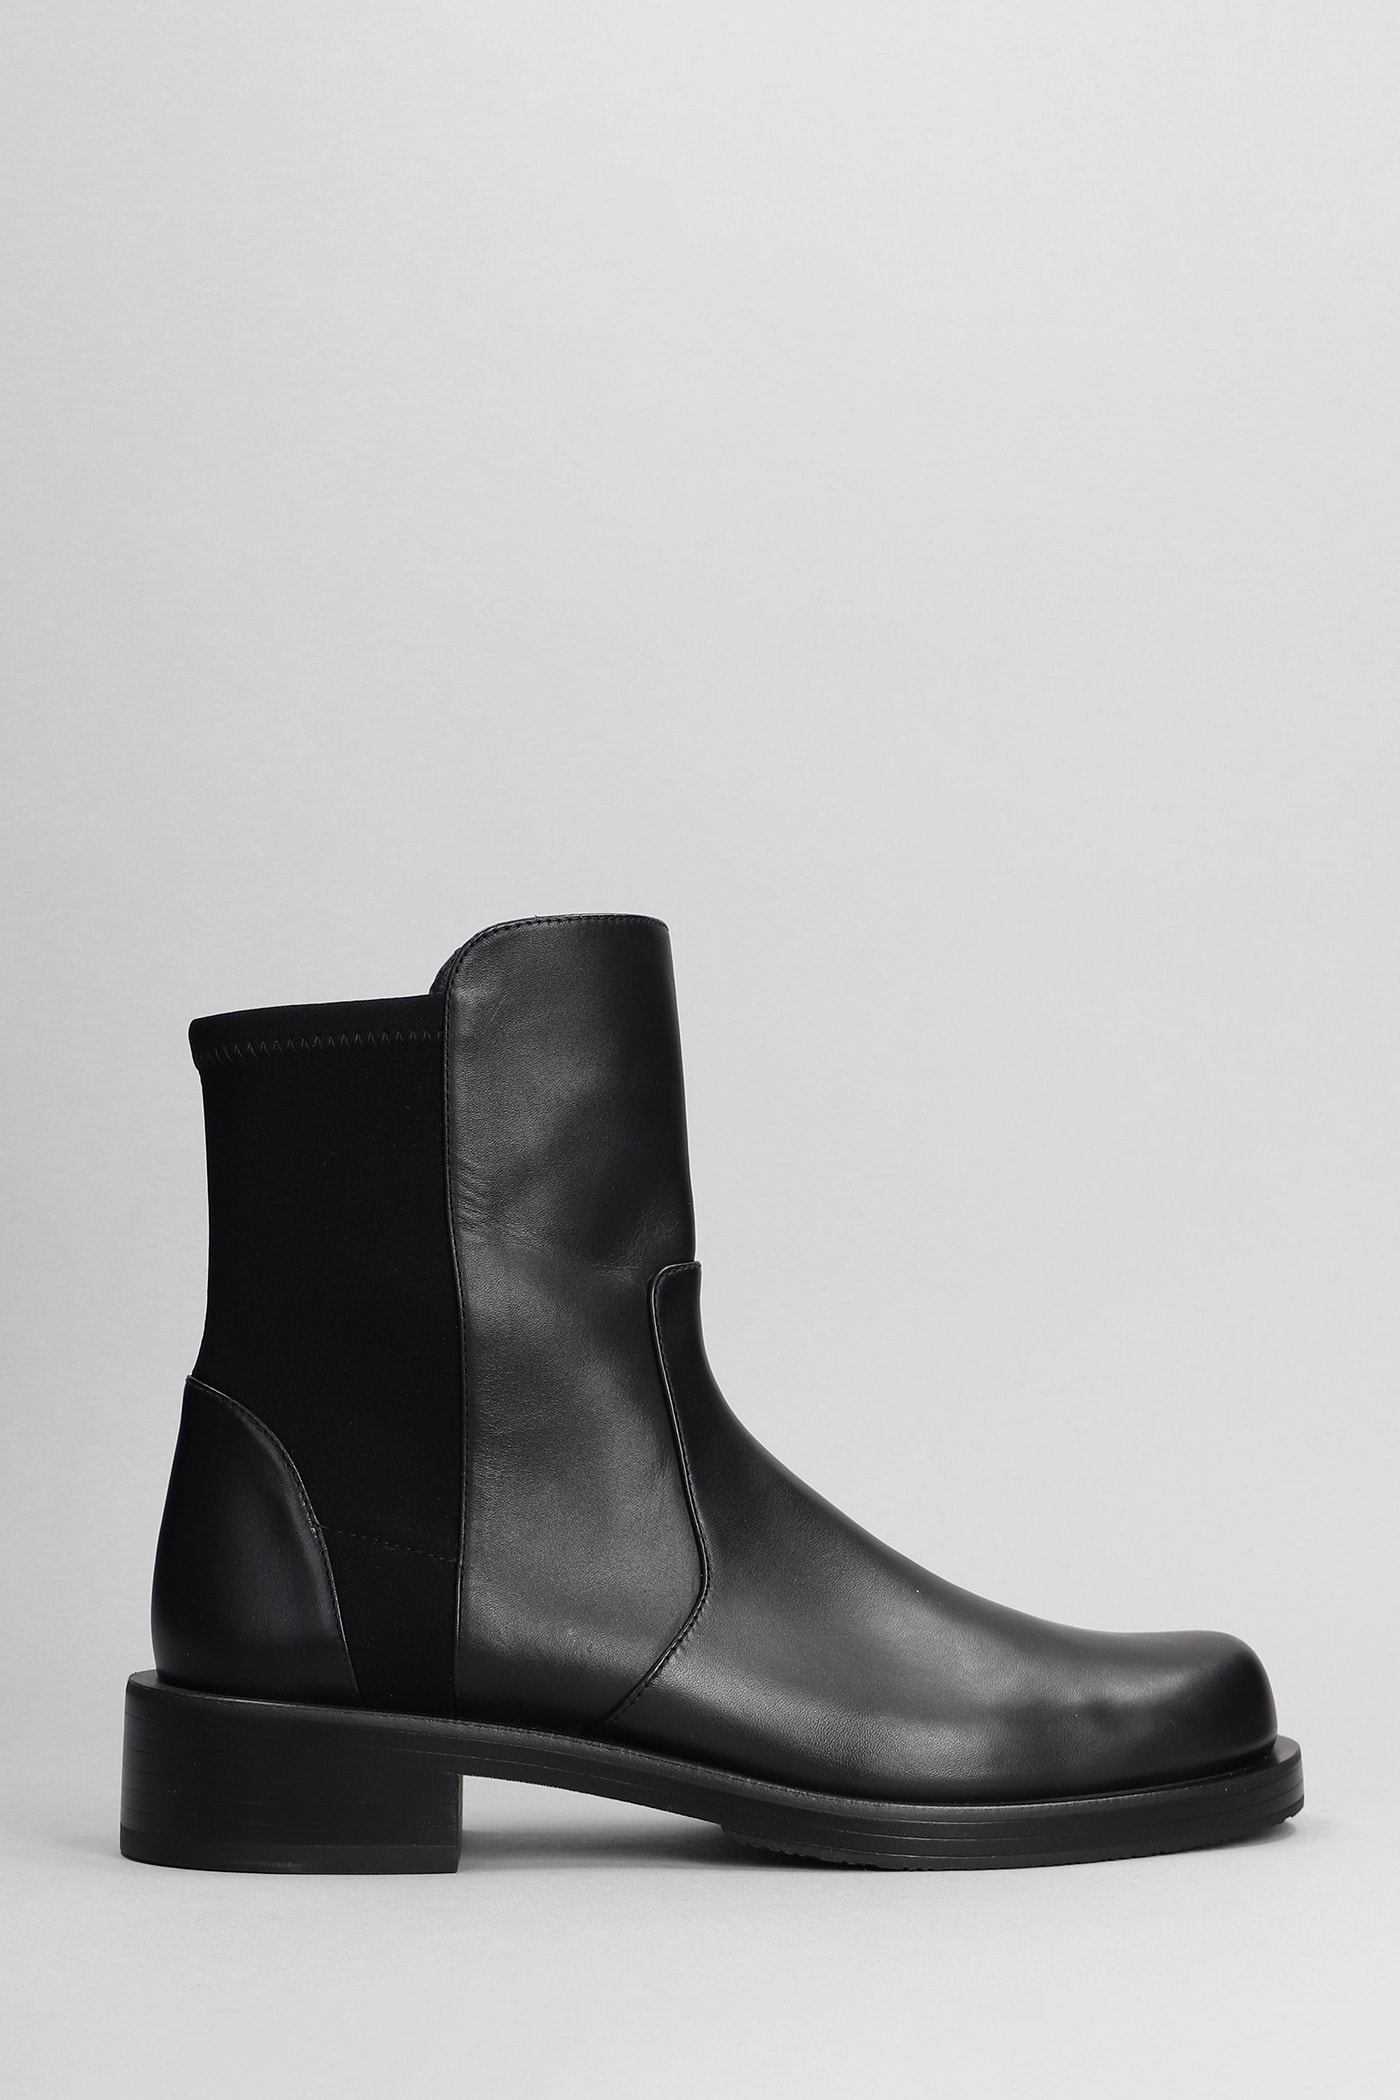 STUART WEITZMAN 5050 BOLD BOOTIE ANKLE BOOTS IN BLACK LEATHER